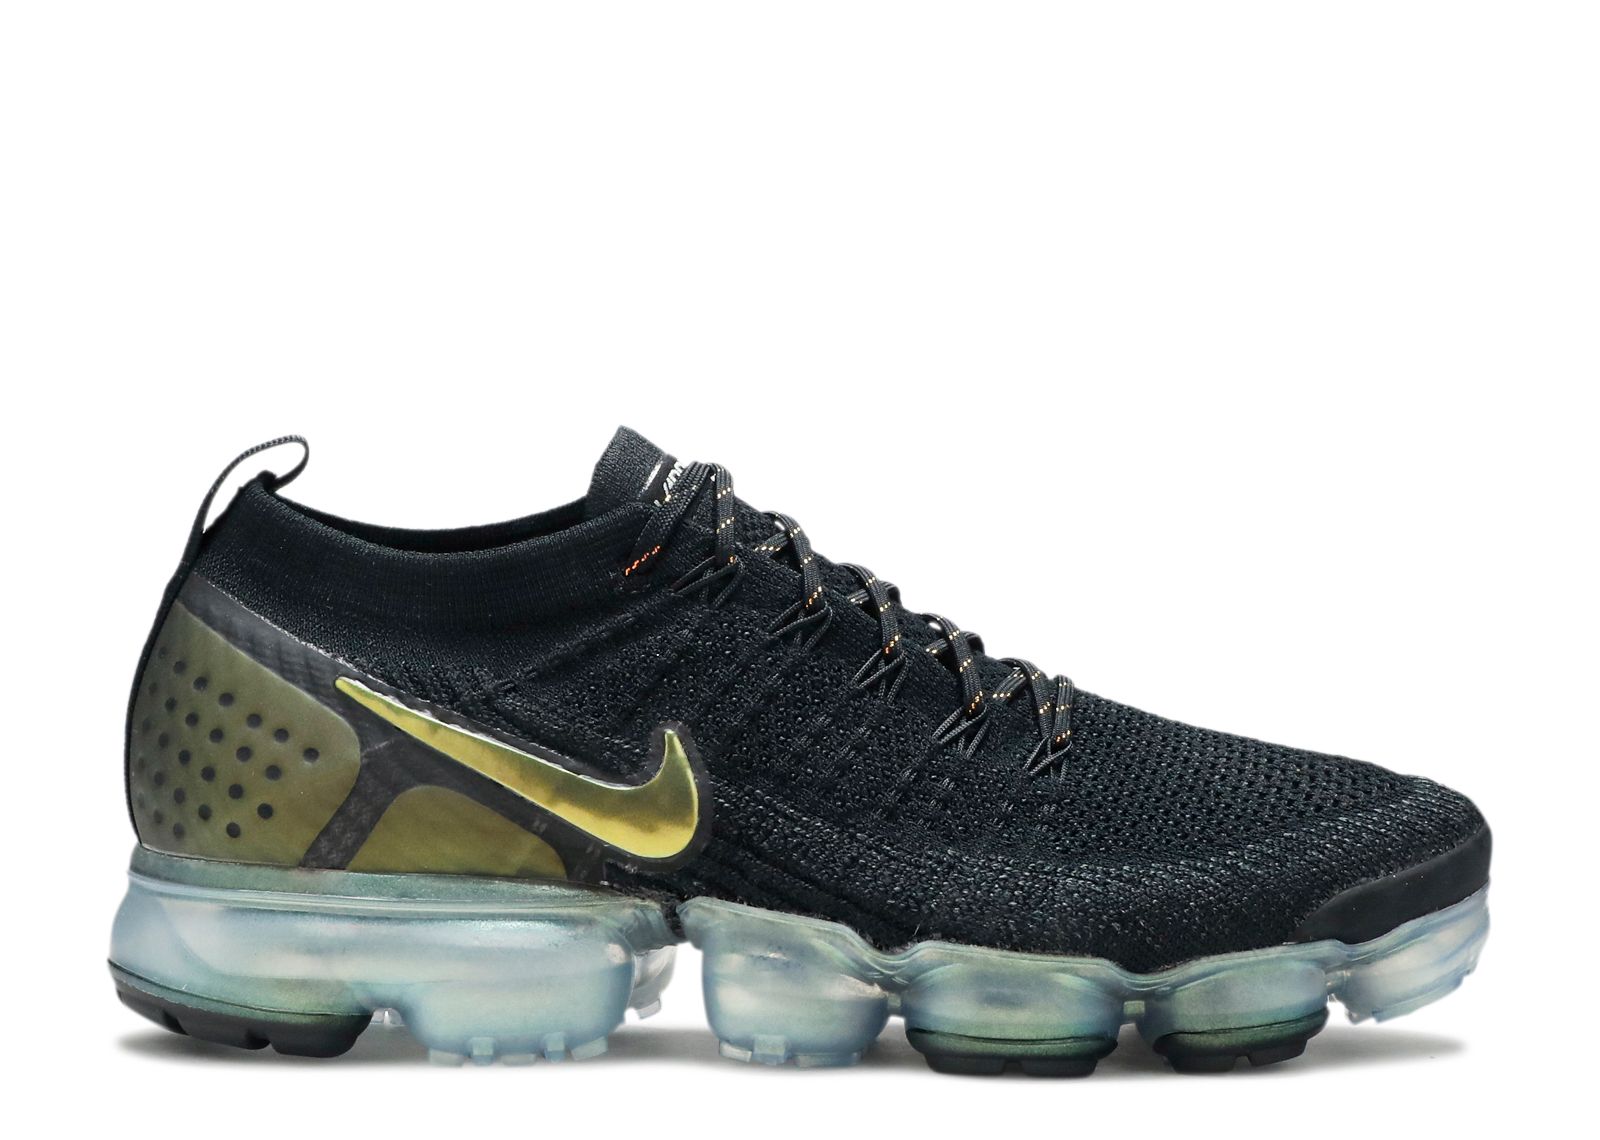 vapormax flyknit gold and black